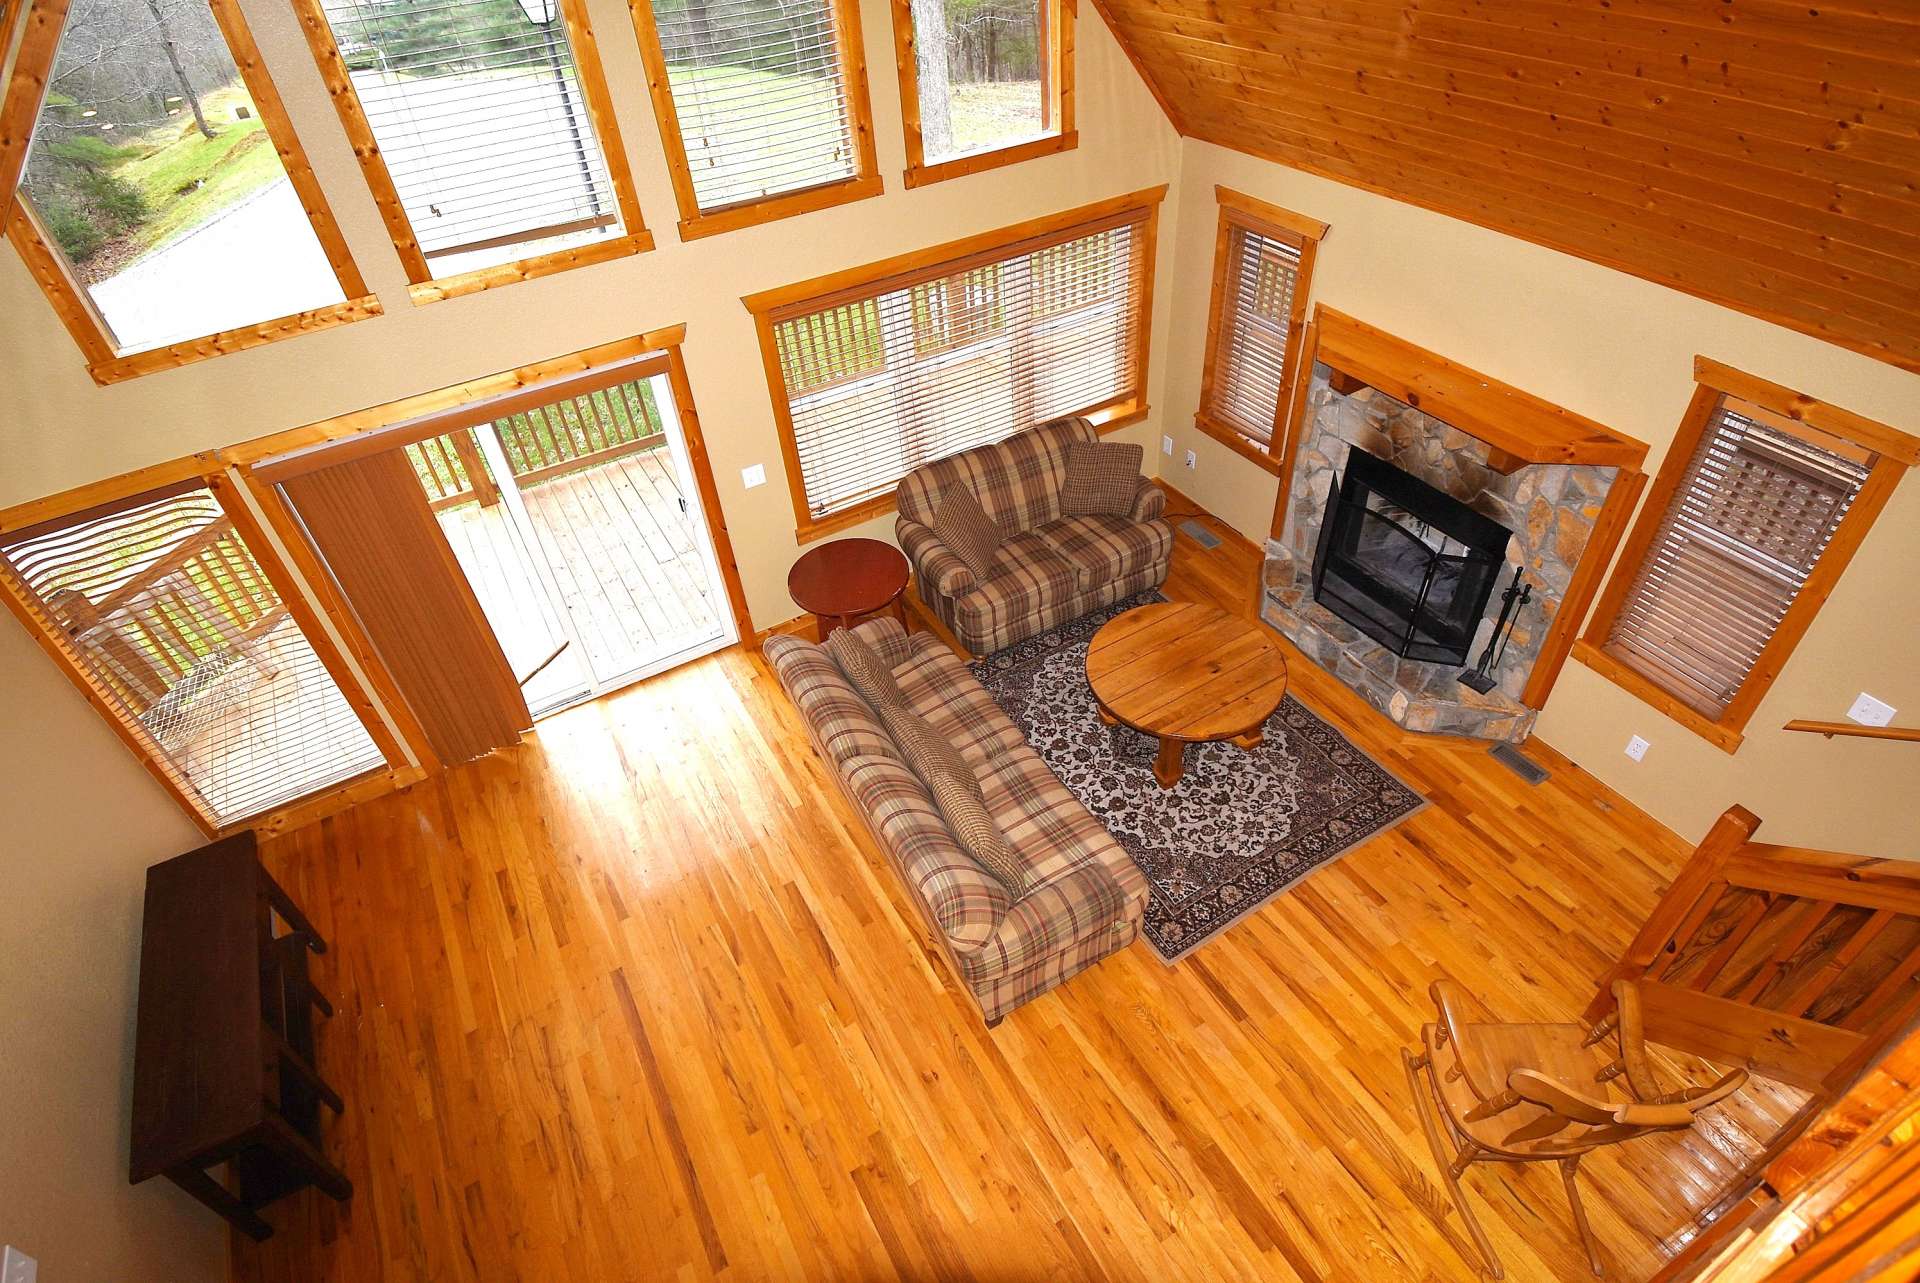 While the windows and vaulted ceiling enhance the open feel of the cabin, a stone wood-burning fireplace fills the cabin with added warmth on cool winter evenings.